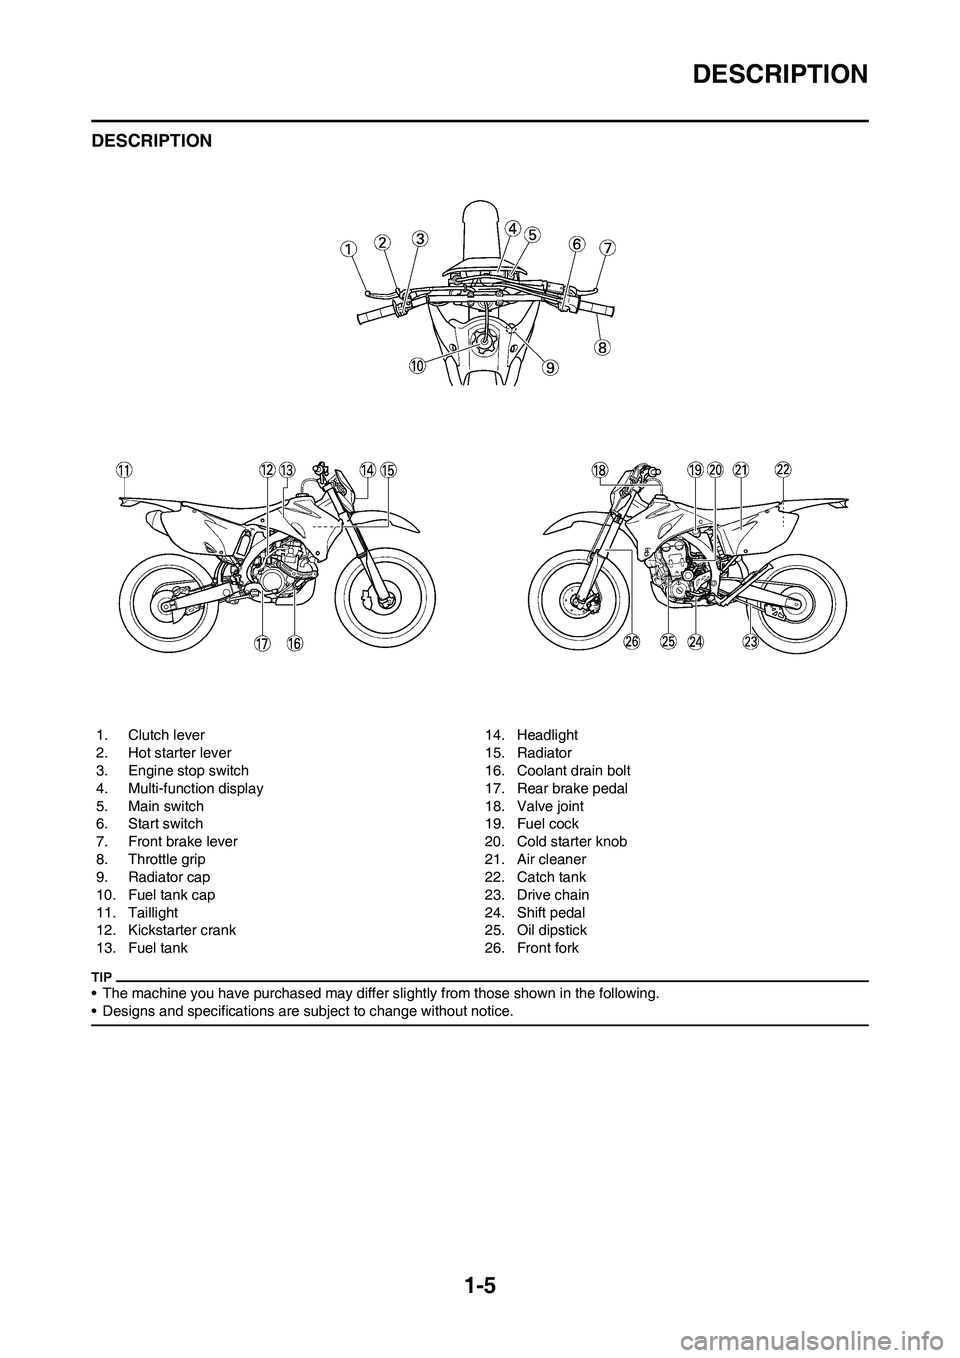 YAMAHA WR 450F 2010  Owners Manual 
1-5
DESCRIPTION
DESCRIPTION
• The machine you have purchased may differ slightly from those shown in the following.
• Designs and specifications are subject to change without notice.
1. Clutch le